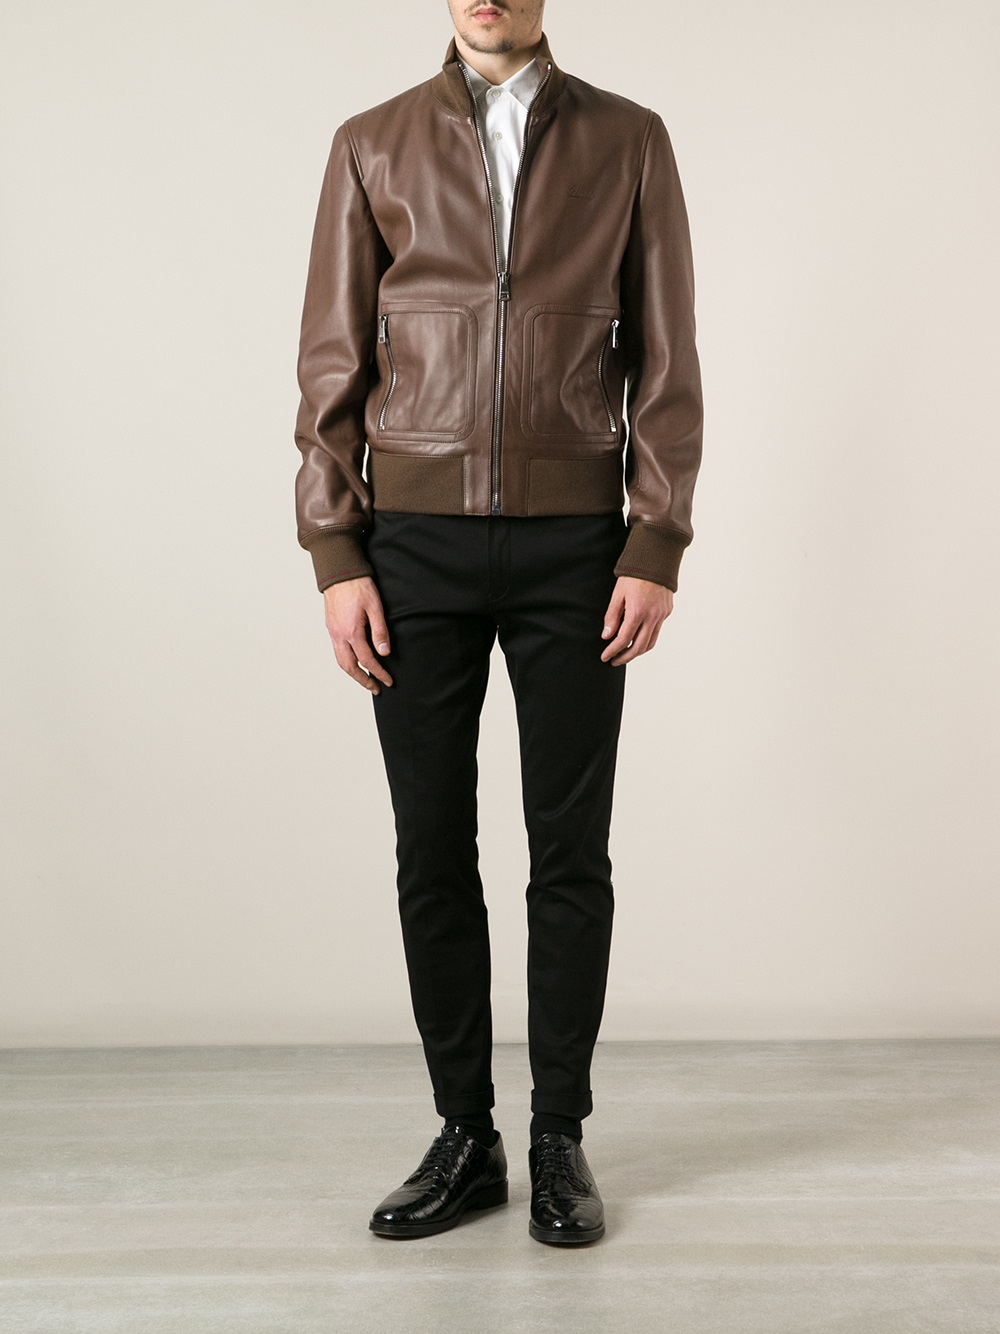 Gucci Leather Jacket in Brown for Men | Lyst